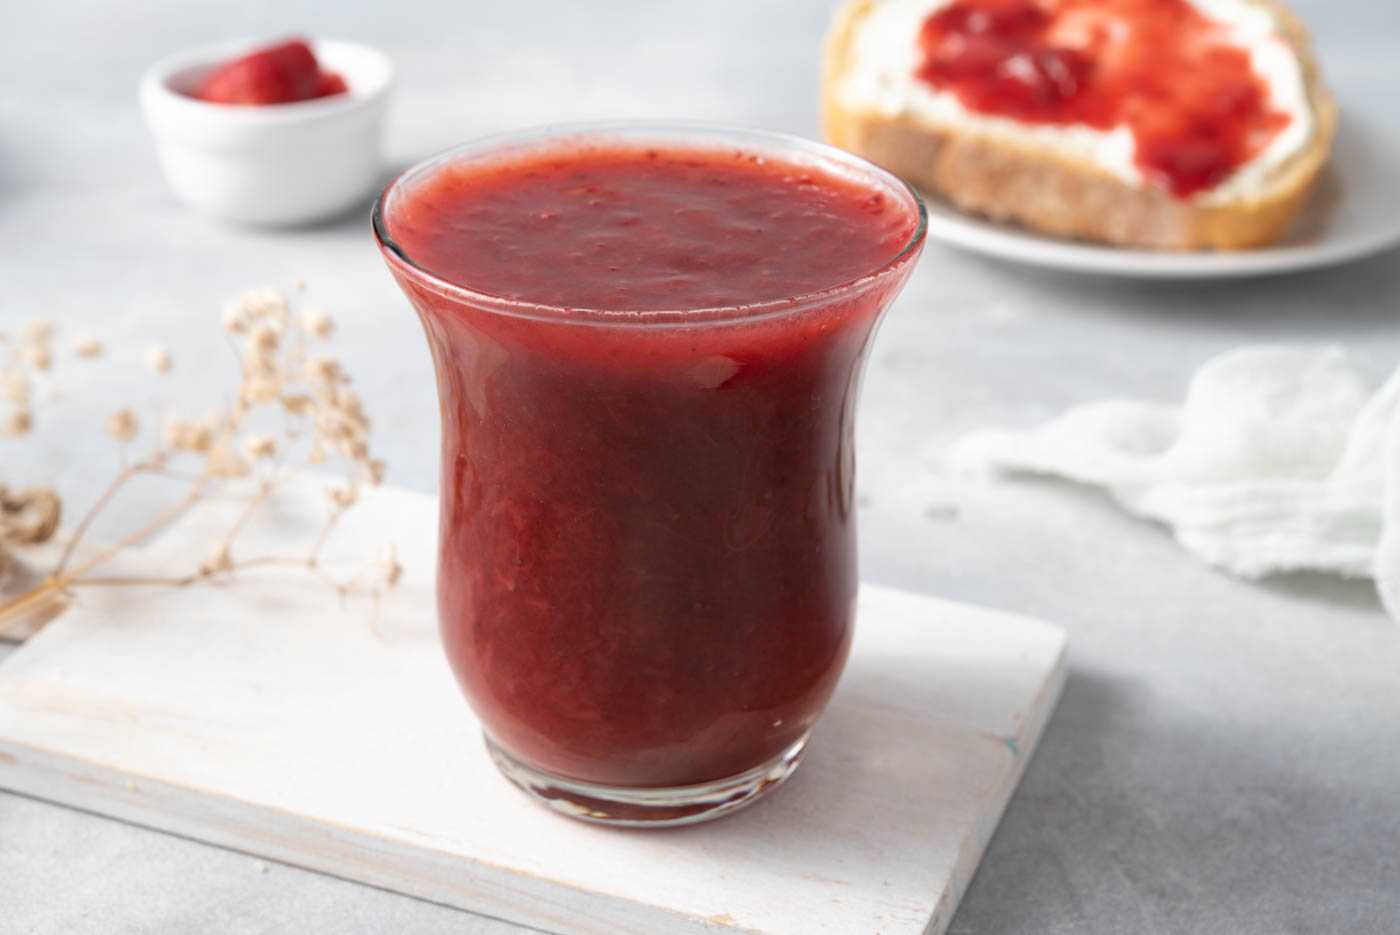 Strawberry jam in high glass with a bread with butter and jam on side